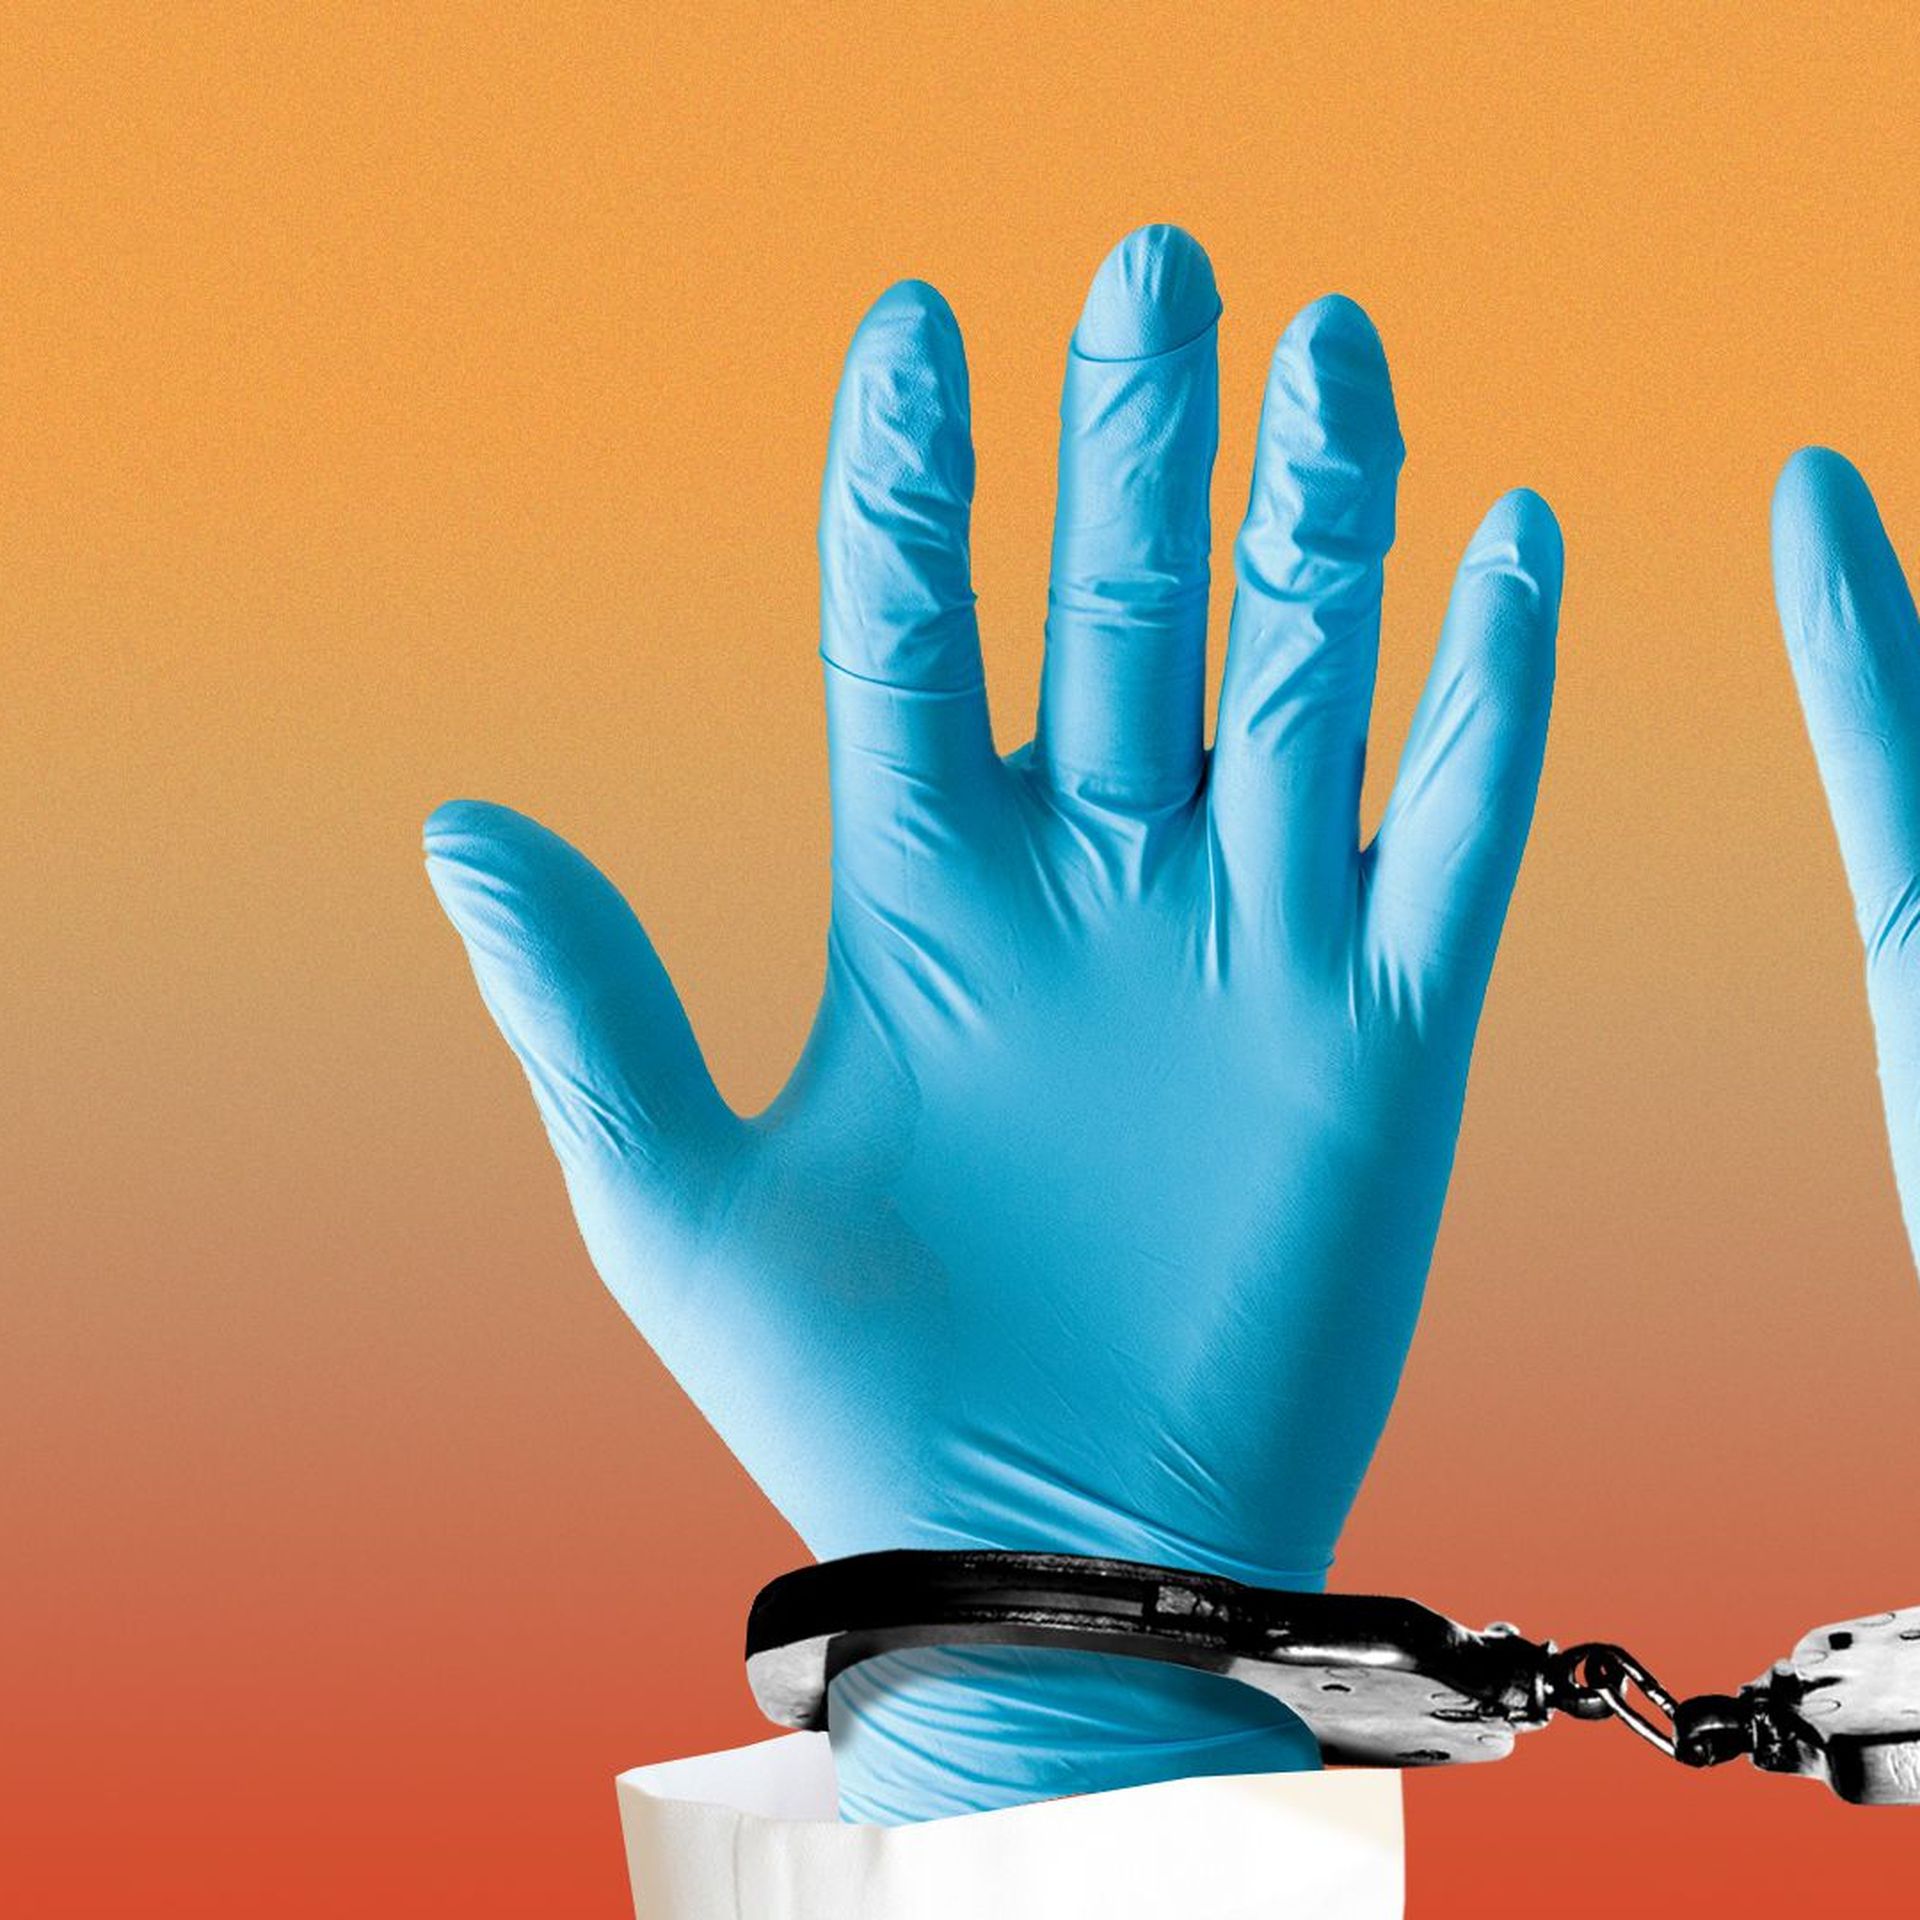 Illustration of a doctor's handcuffed hands wearing medical gloves